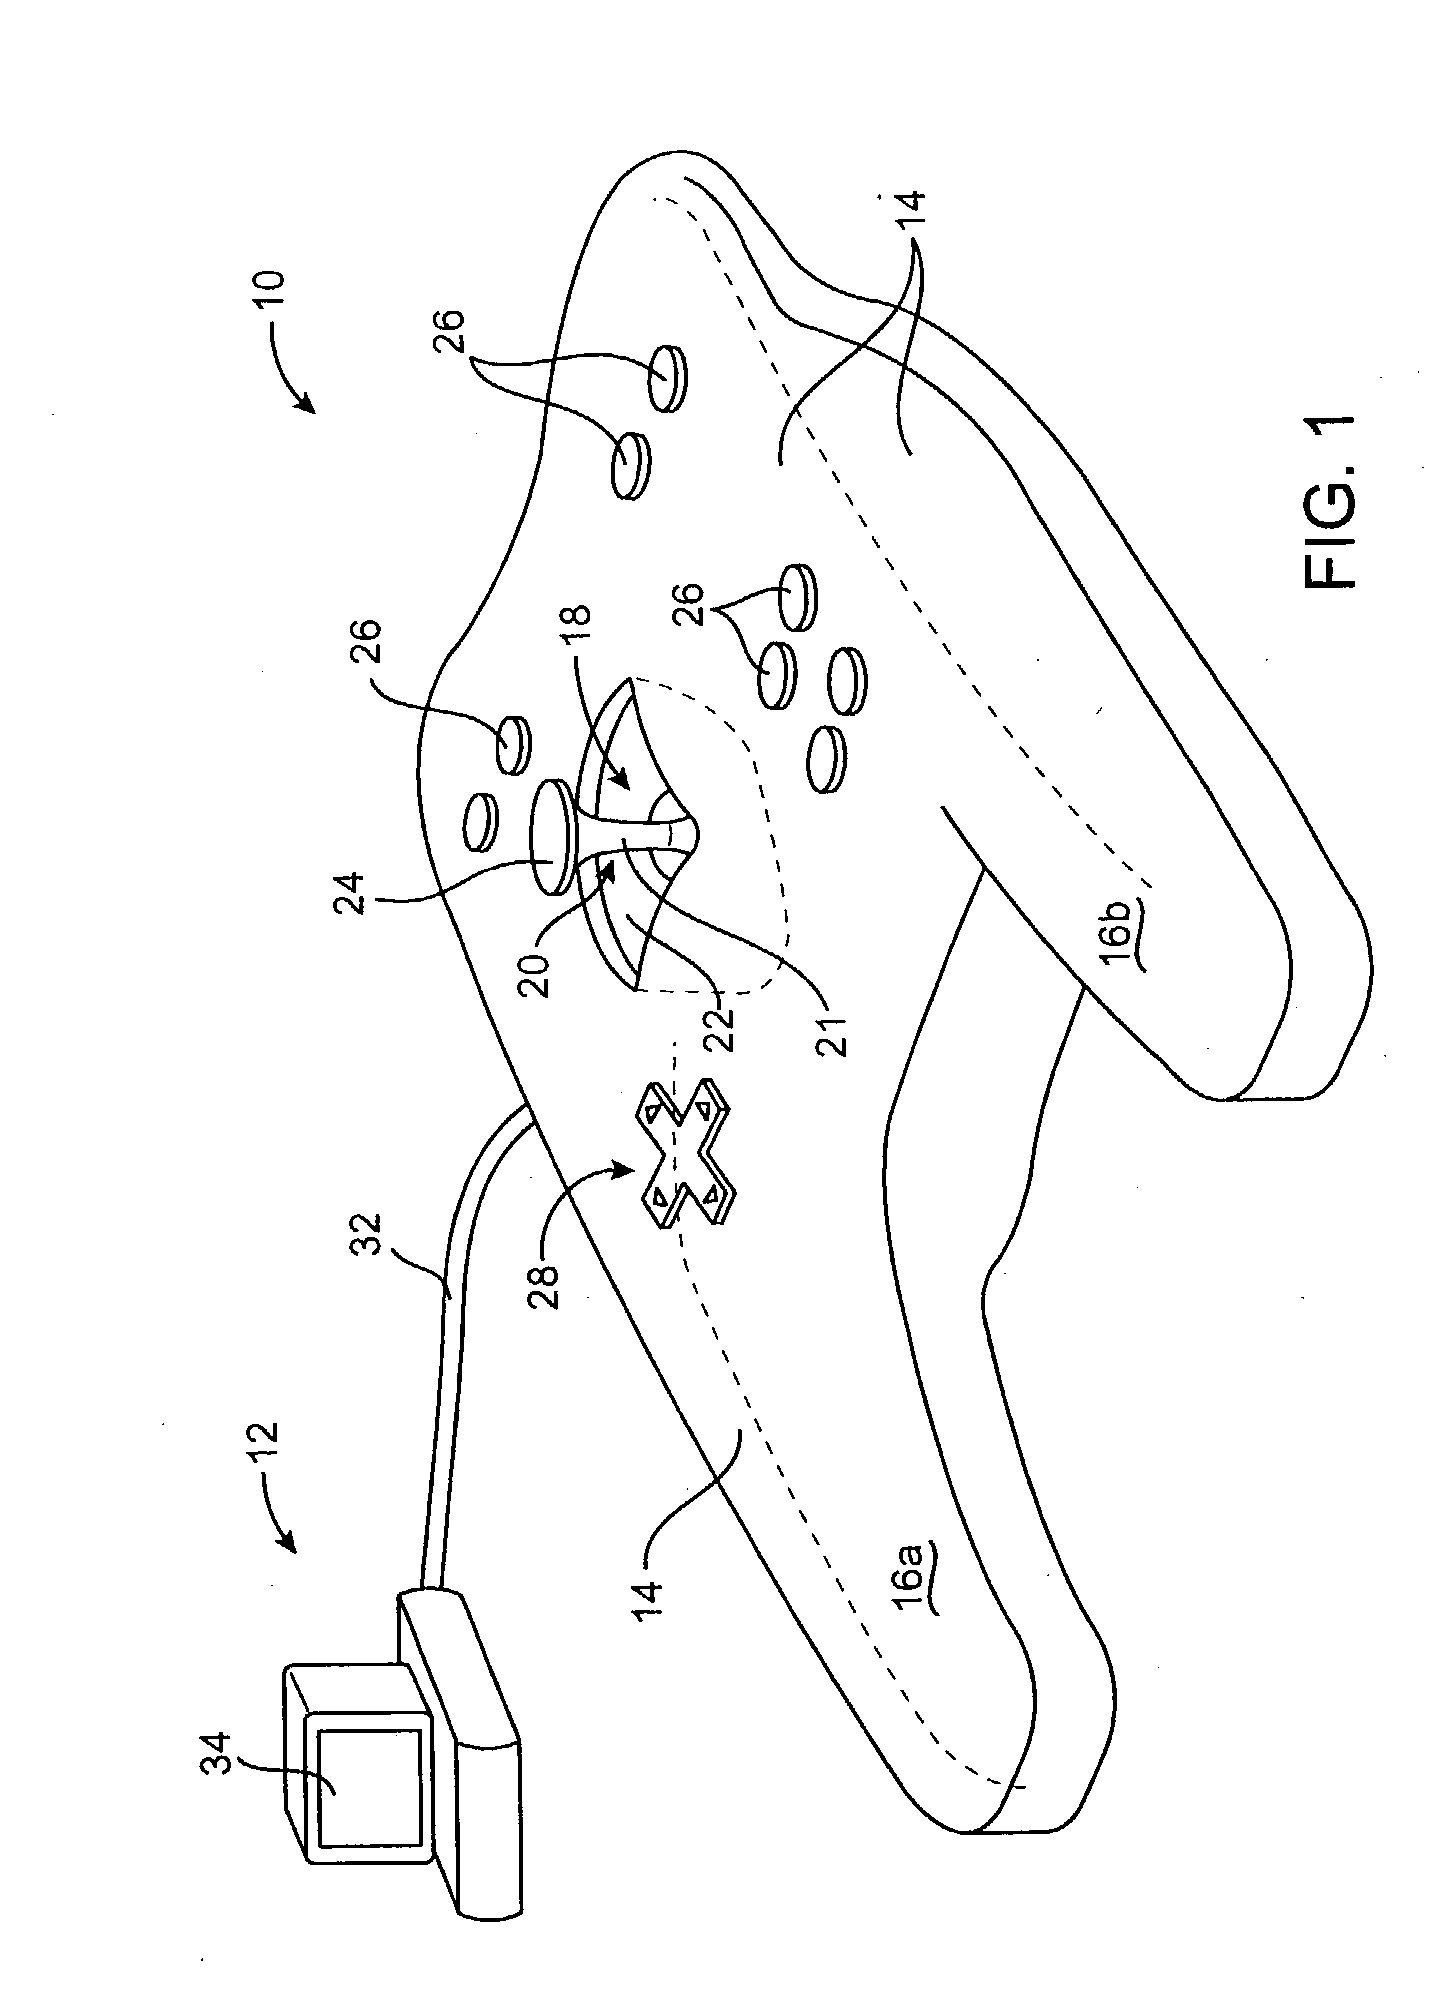 Flexure mechanism for interface device